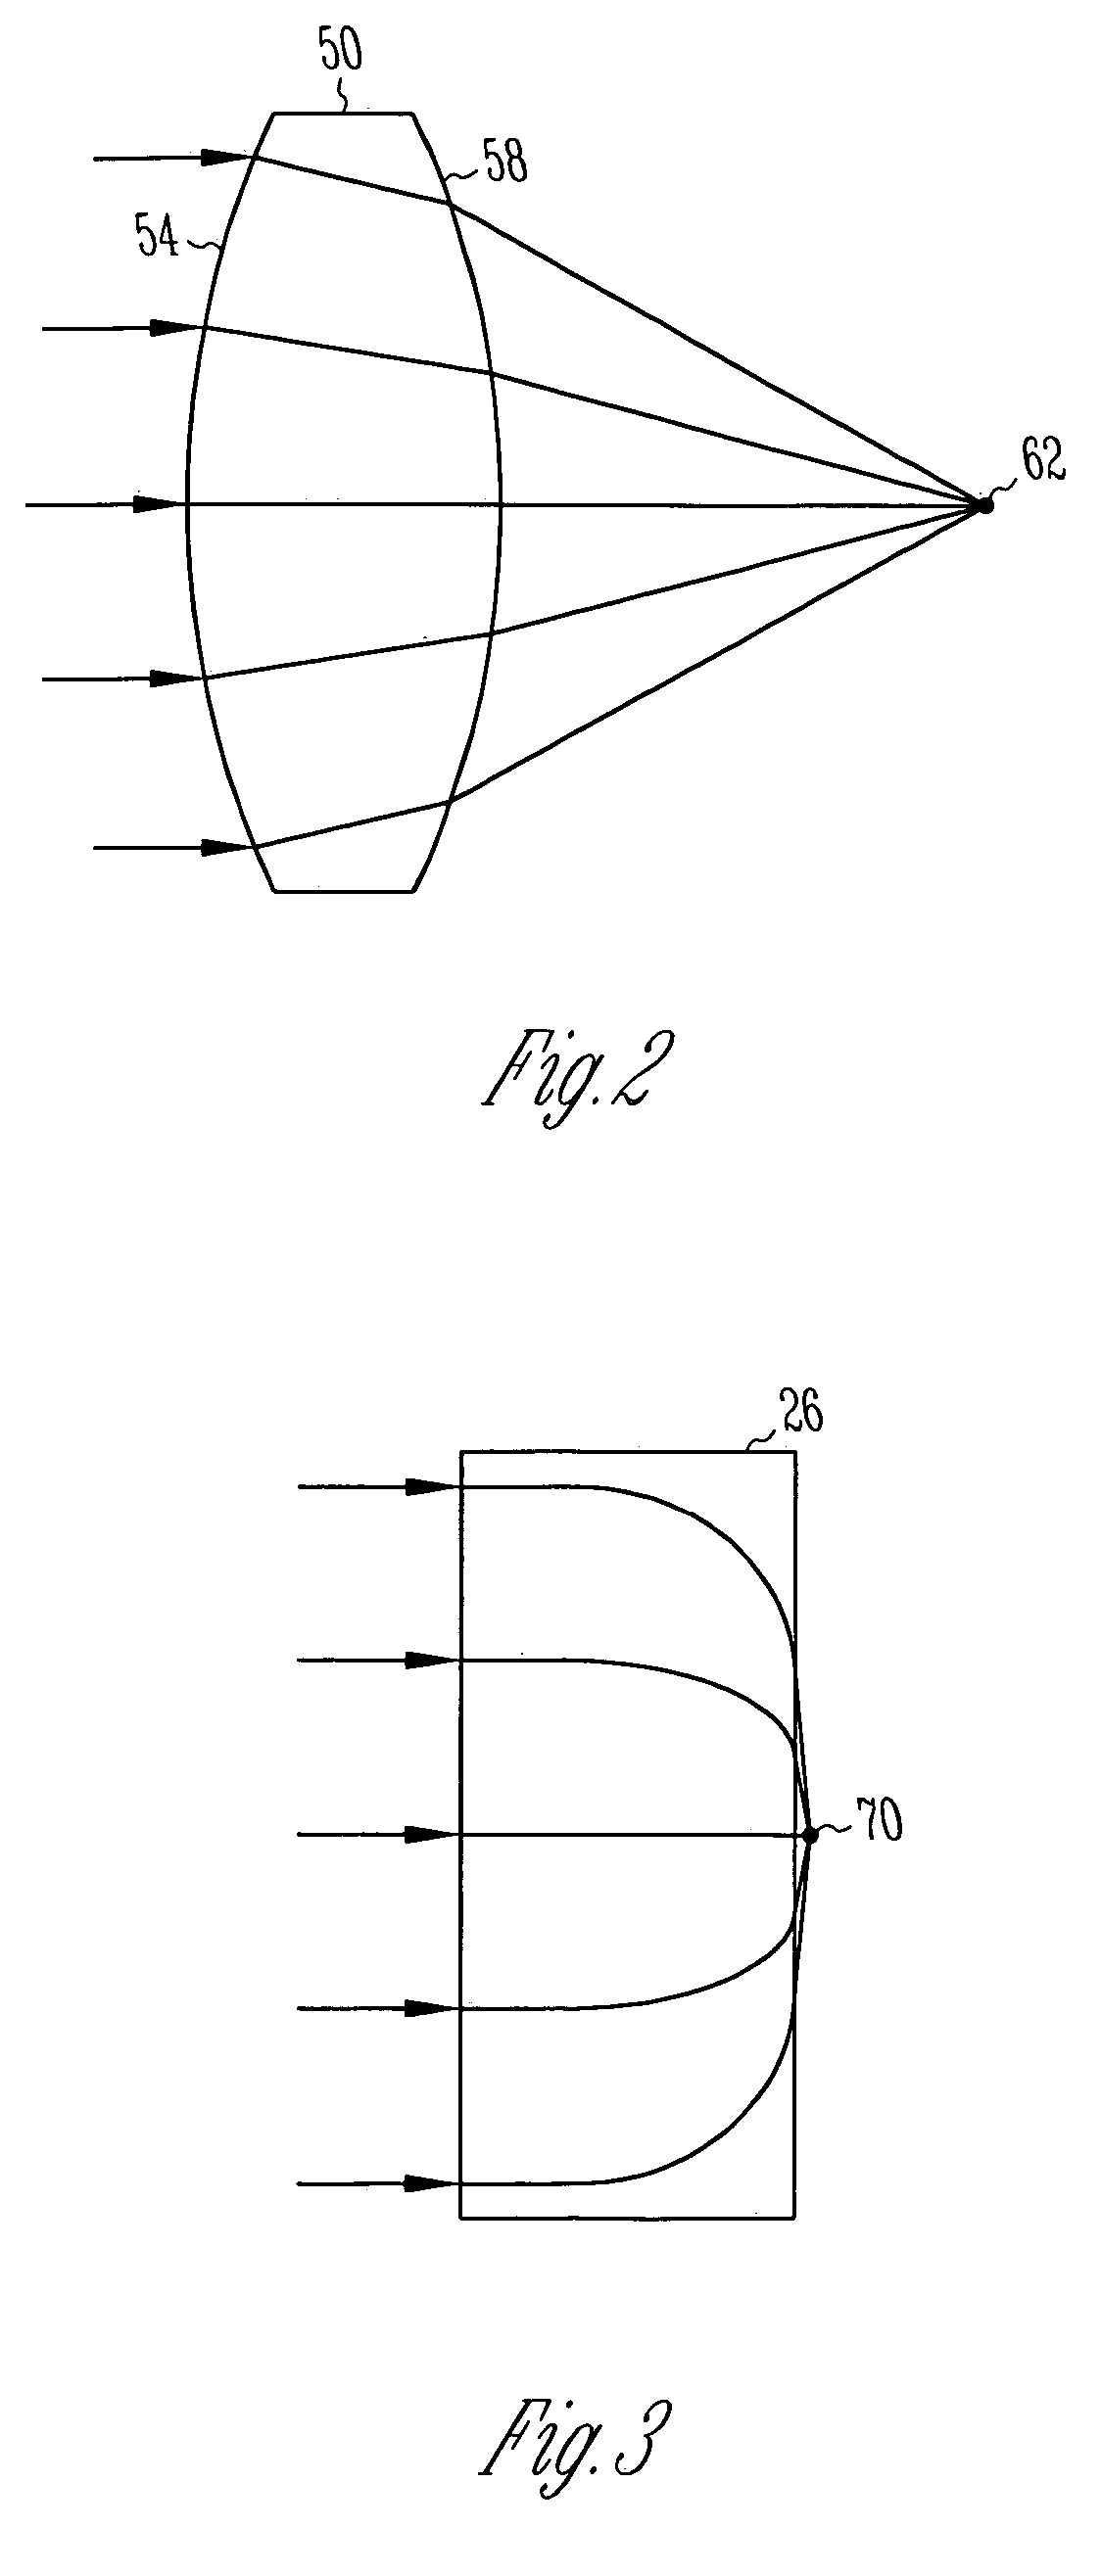 System and method for detecting an object on a moving web